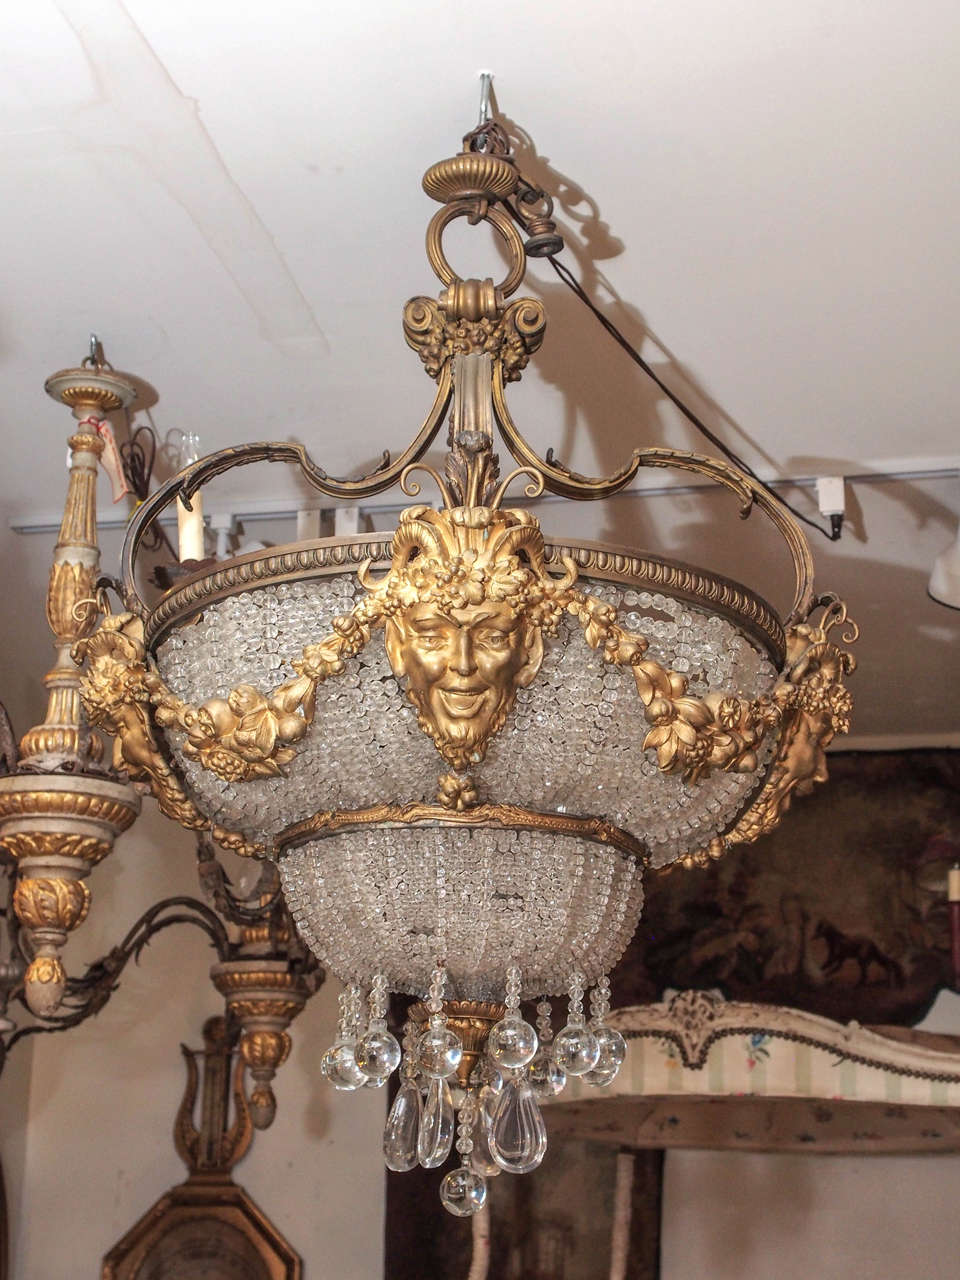 Unusual gilt bronze and crystal bead Beaux Arts light fixture with bacchus and floral garlands.